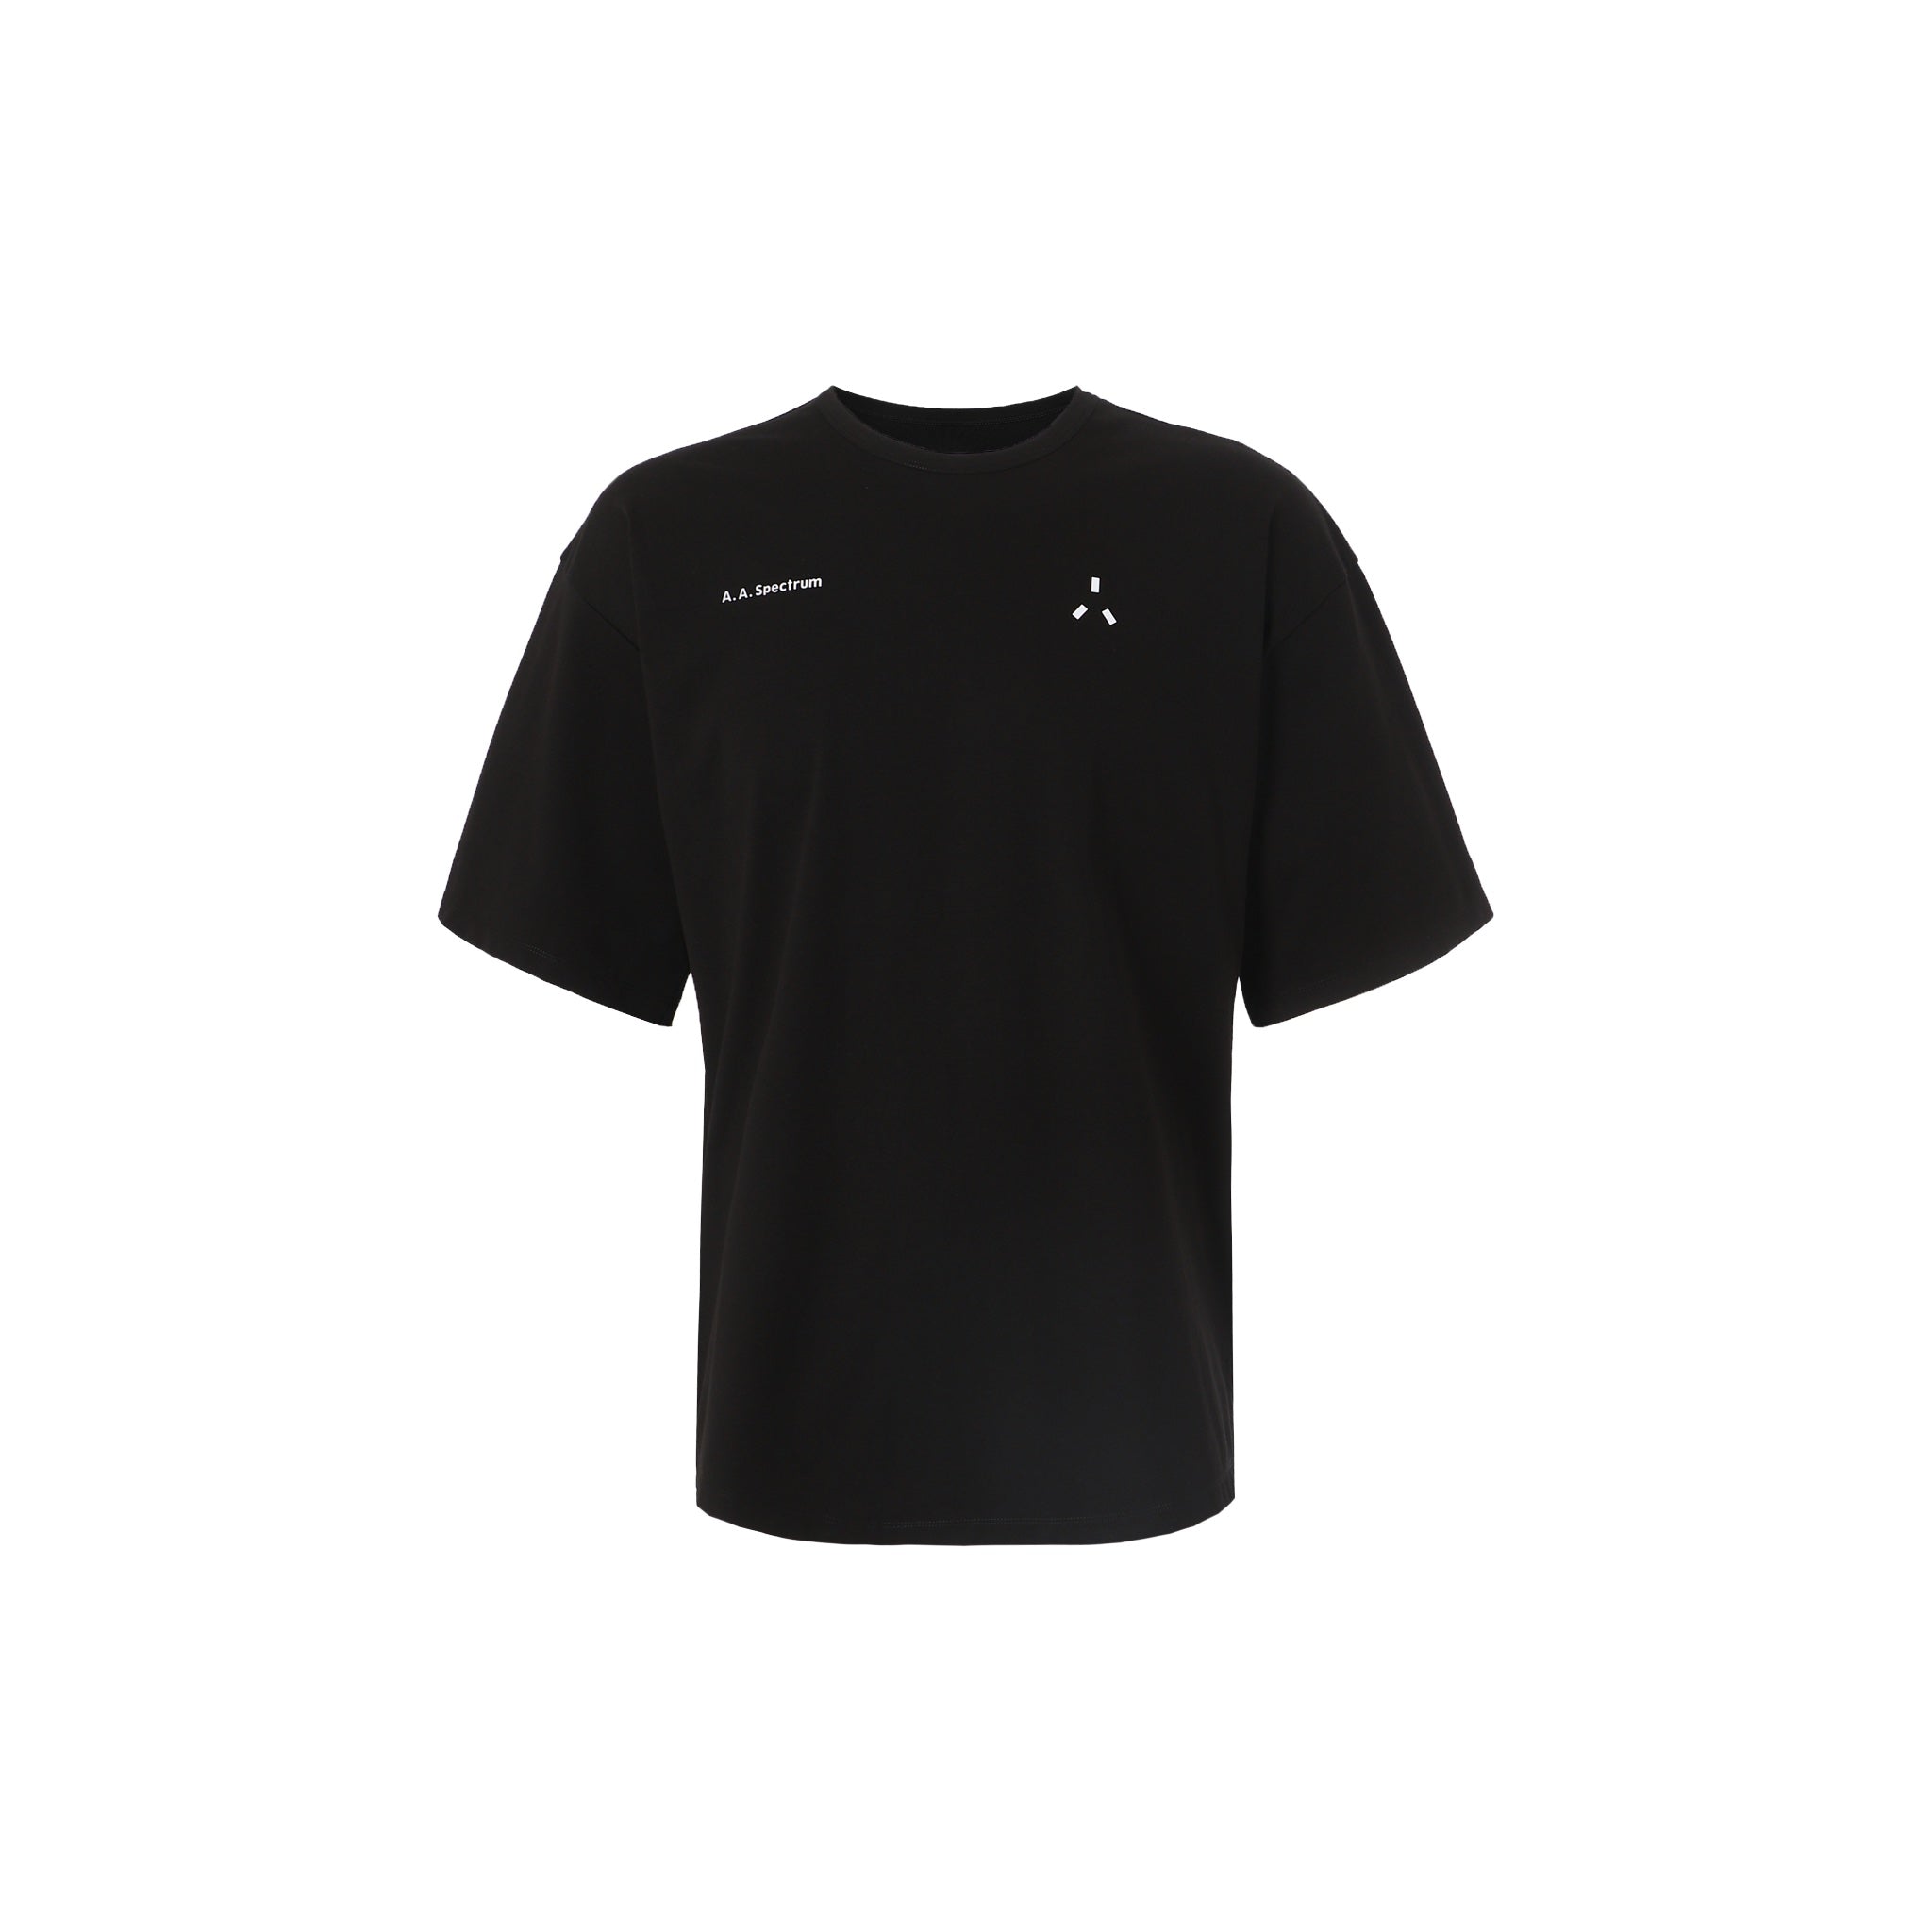 A.A. Spectrum Black All About Spectrum Tee | MADA IN CHINA